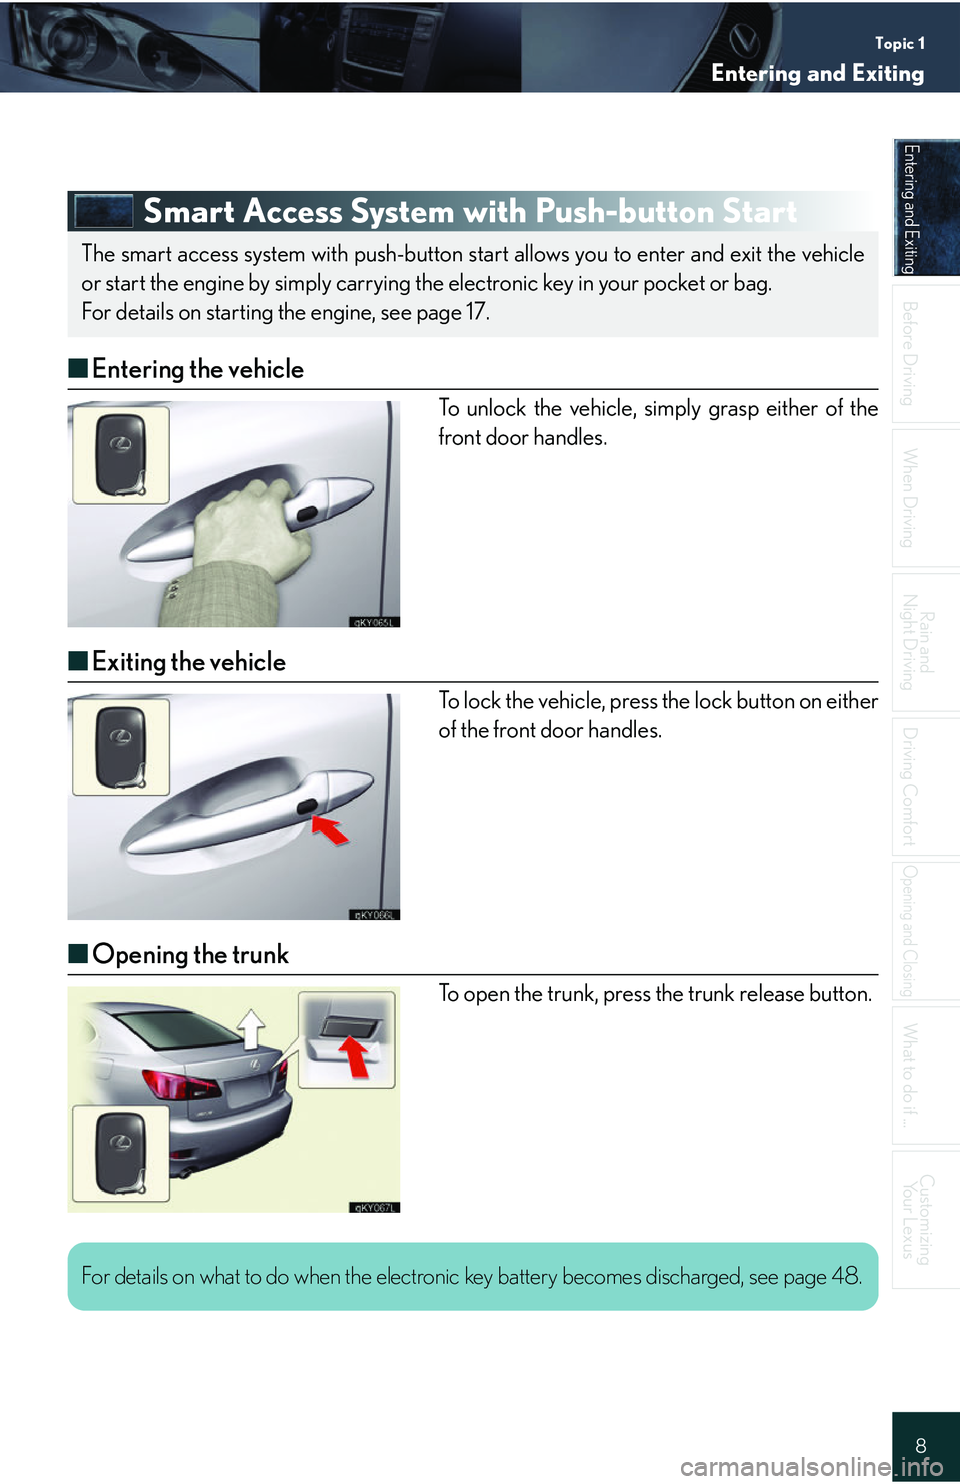 Lexus IS250 2006  Lexus Parking Assist-sensor / LEXUS 2006 IS350/250 QUICK REFERENCE GUIDE Topic 1
Entering and Exiting
8
Entering and Exiting
When Driving
Rain and 
Night Driving
Driving Comfort
Opening and Closing
What to do if ...
Customizing Yo u r  L e x u s
Before DrivingBefore Drivin